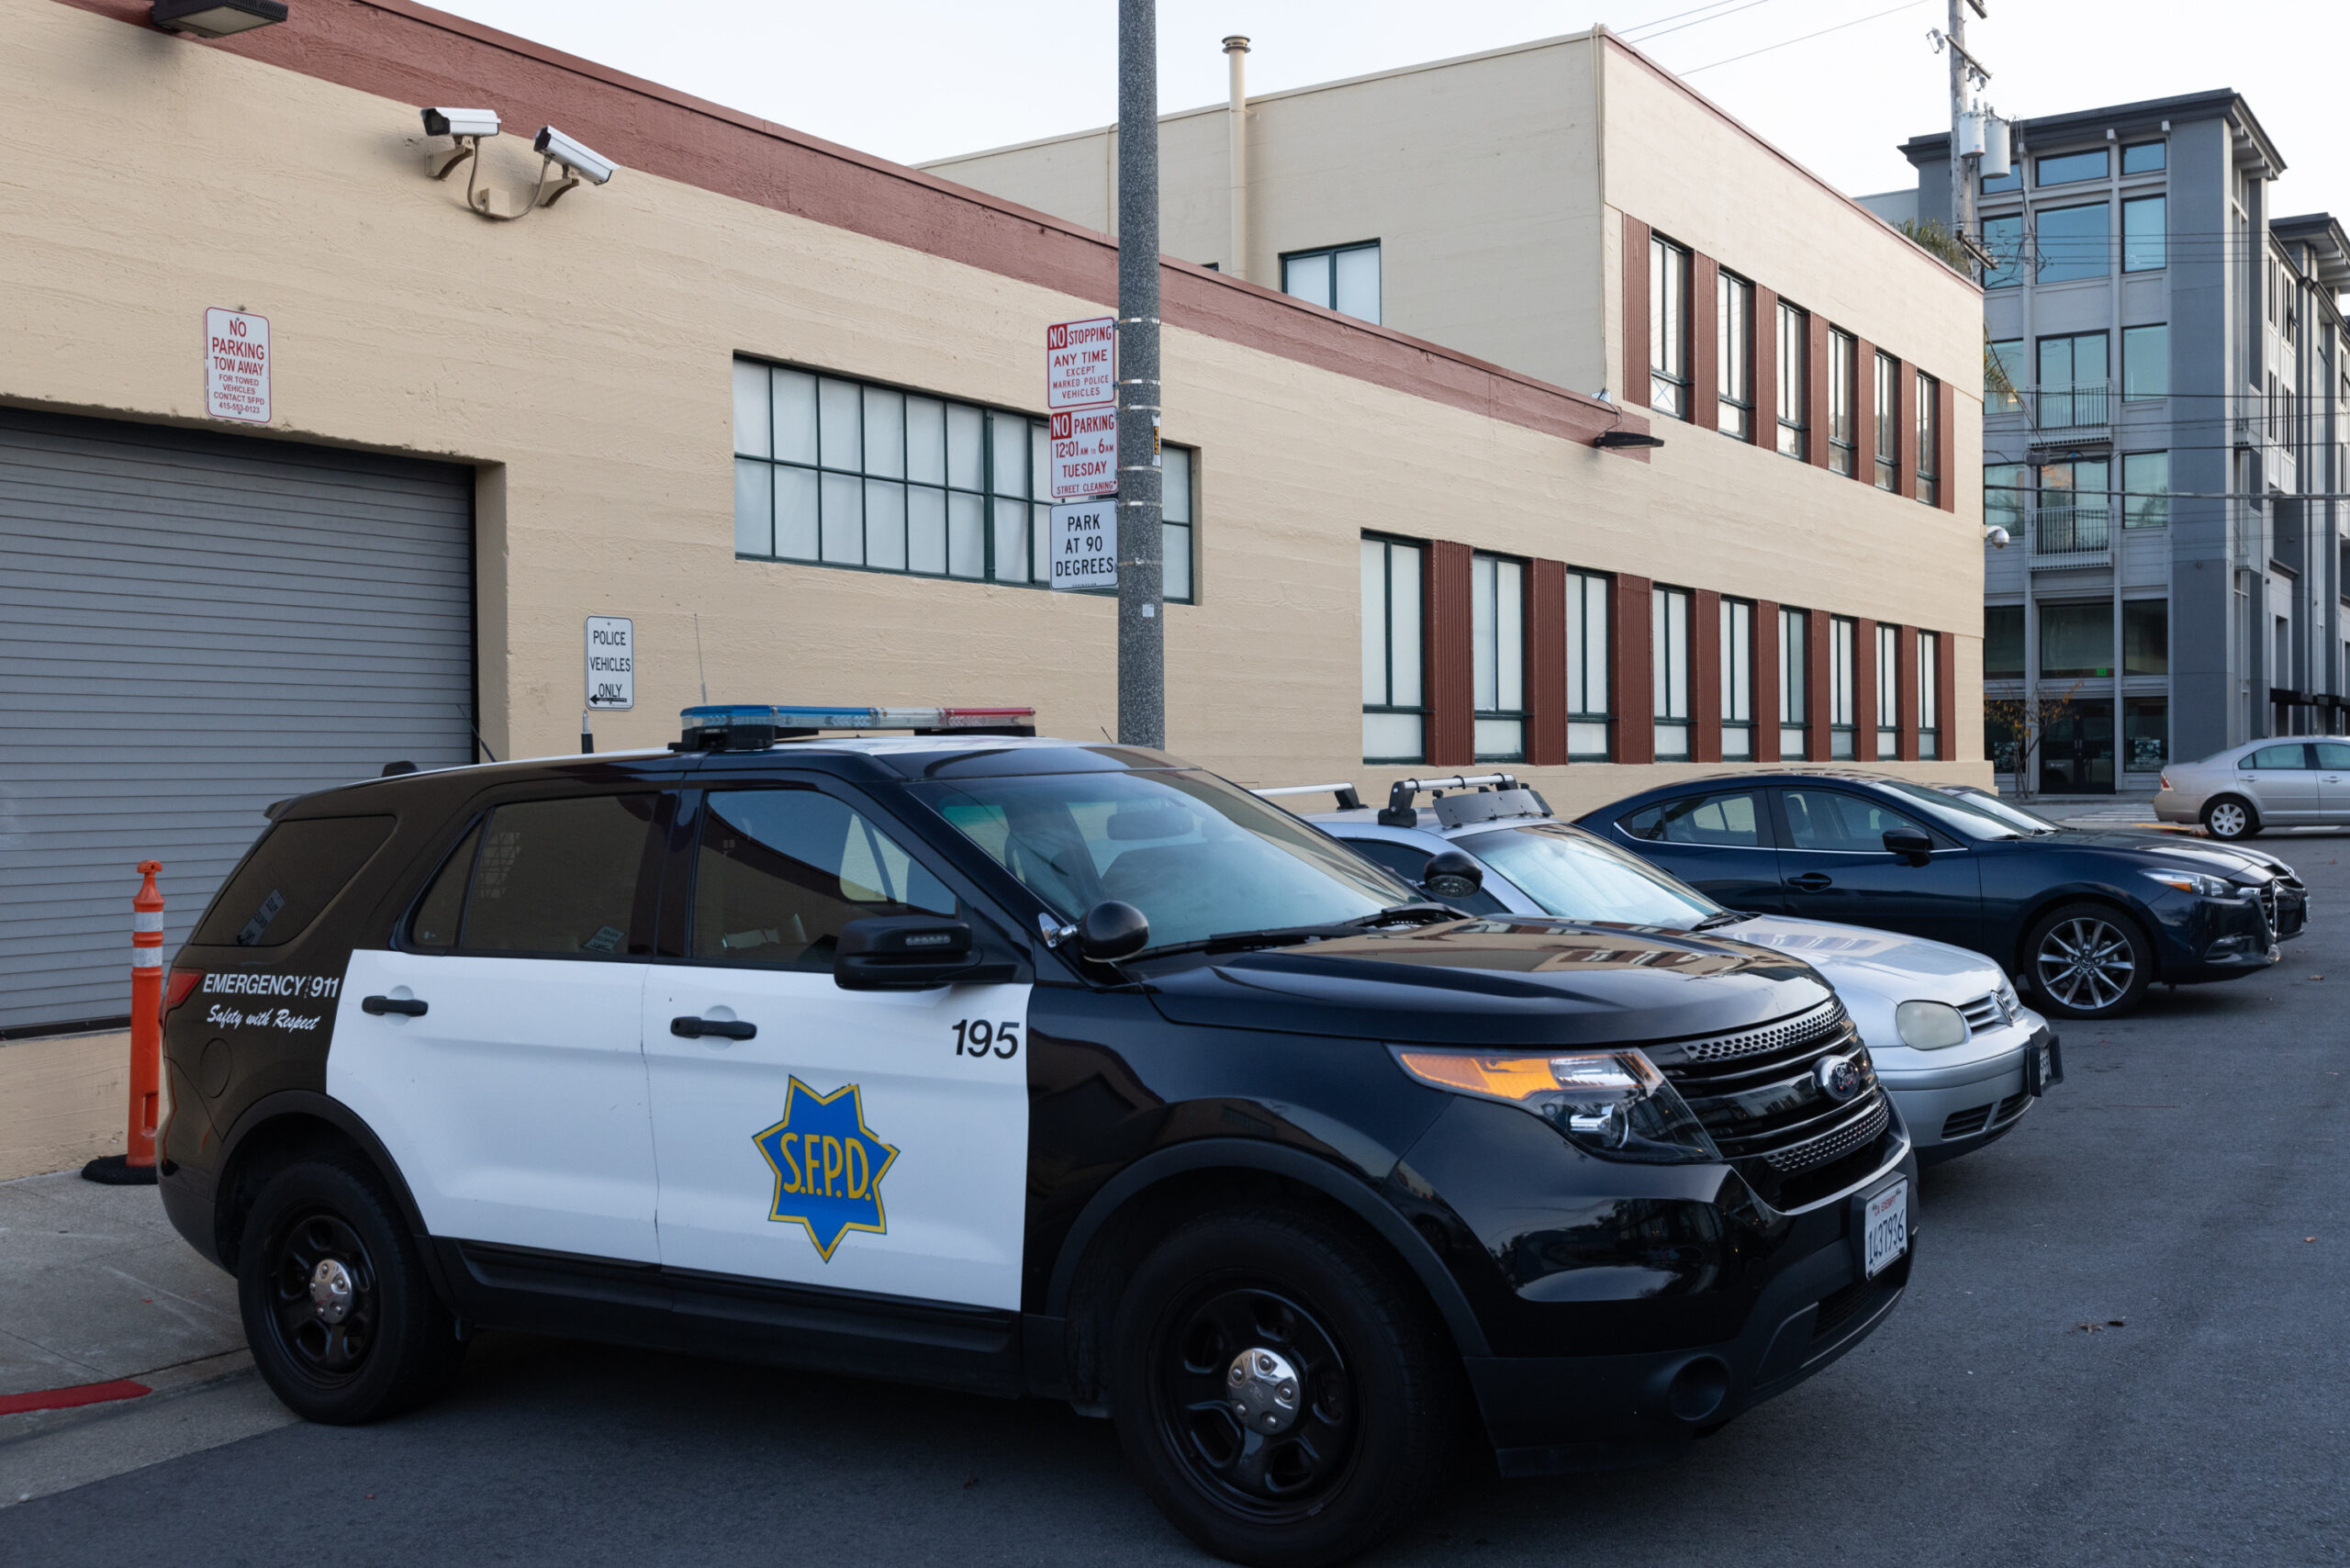 Key Takeaways on the High Cost of Bad Cops in SF